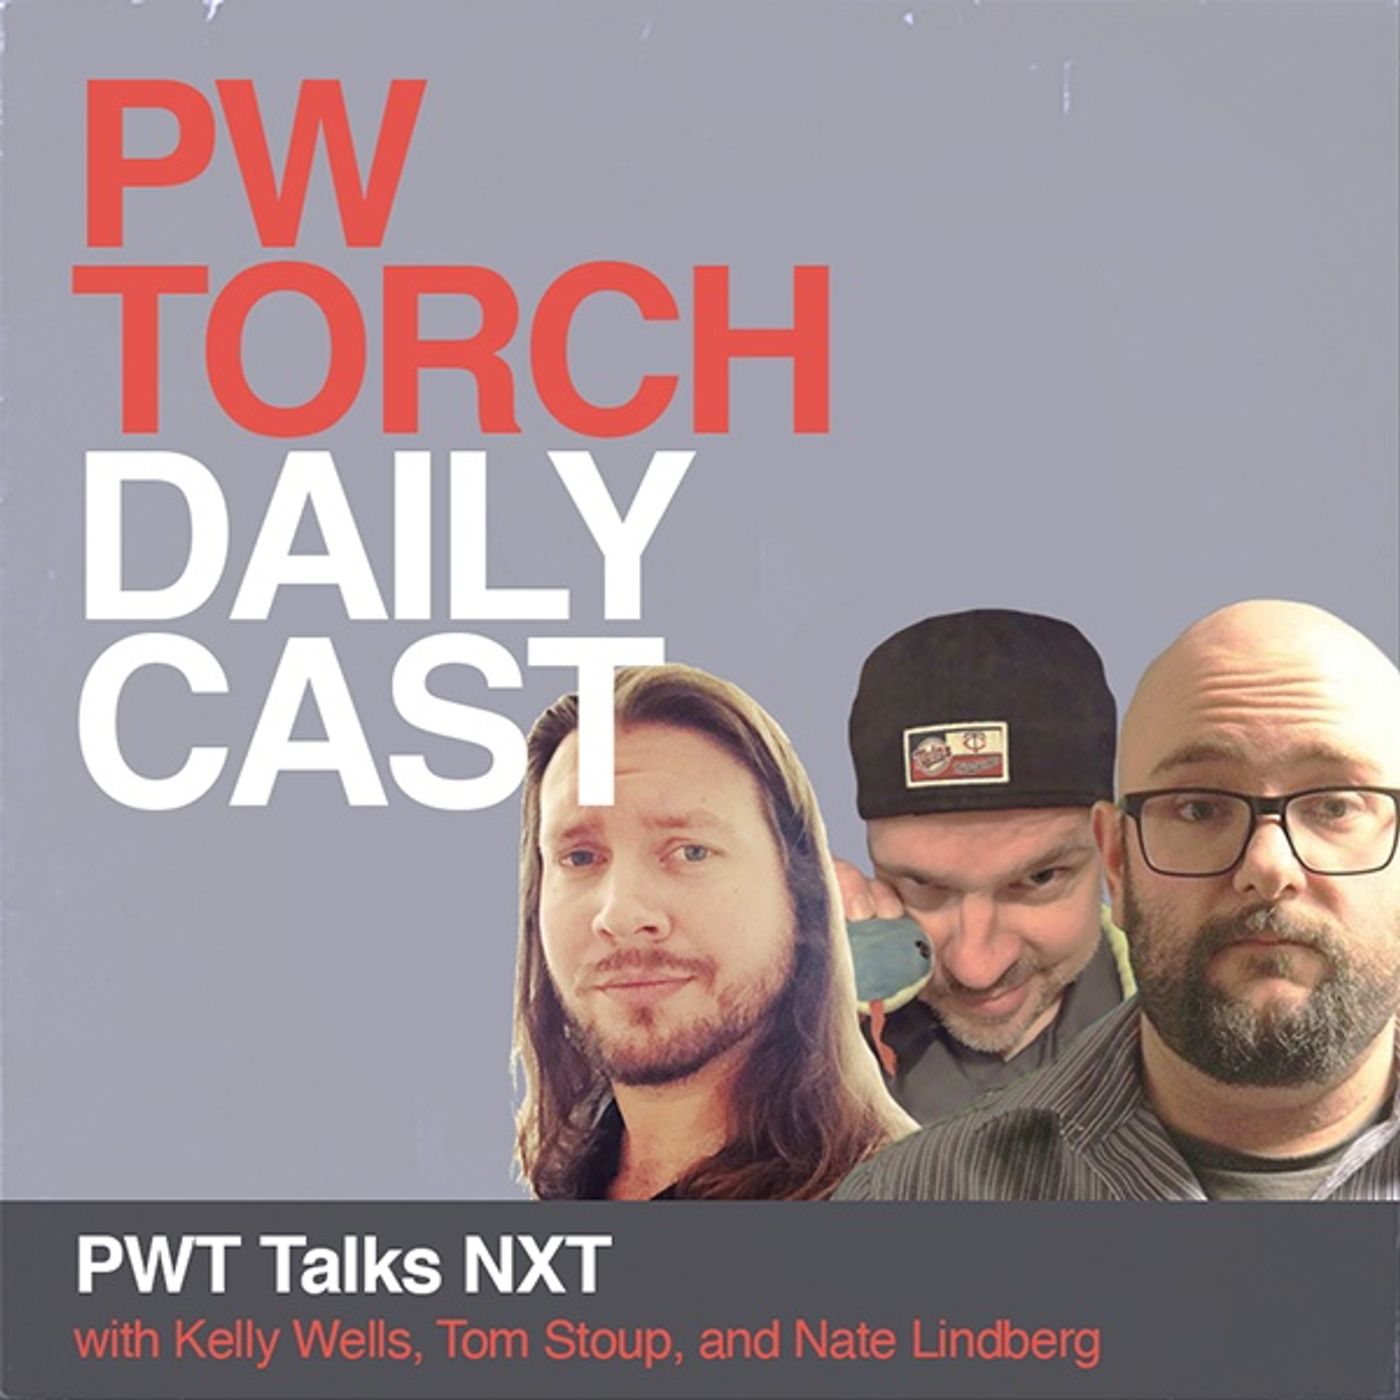 PWTorch Dailycast – PWT Talks NXT - Wells & Stoup cover hype for NXT Roadblock and Stand & Deliver, Pete Dunne vs. Carmelo Hayes, more